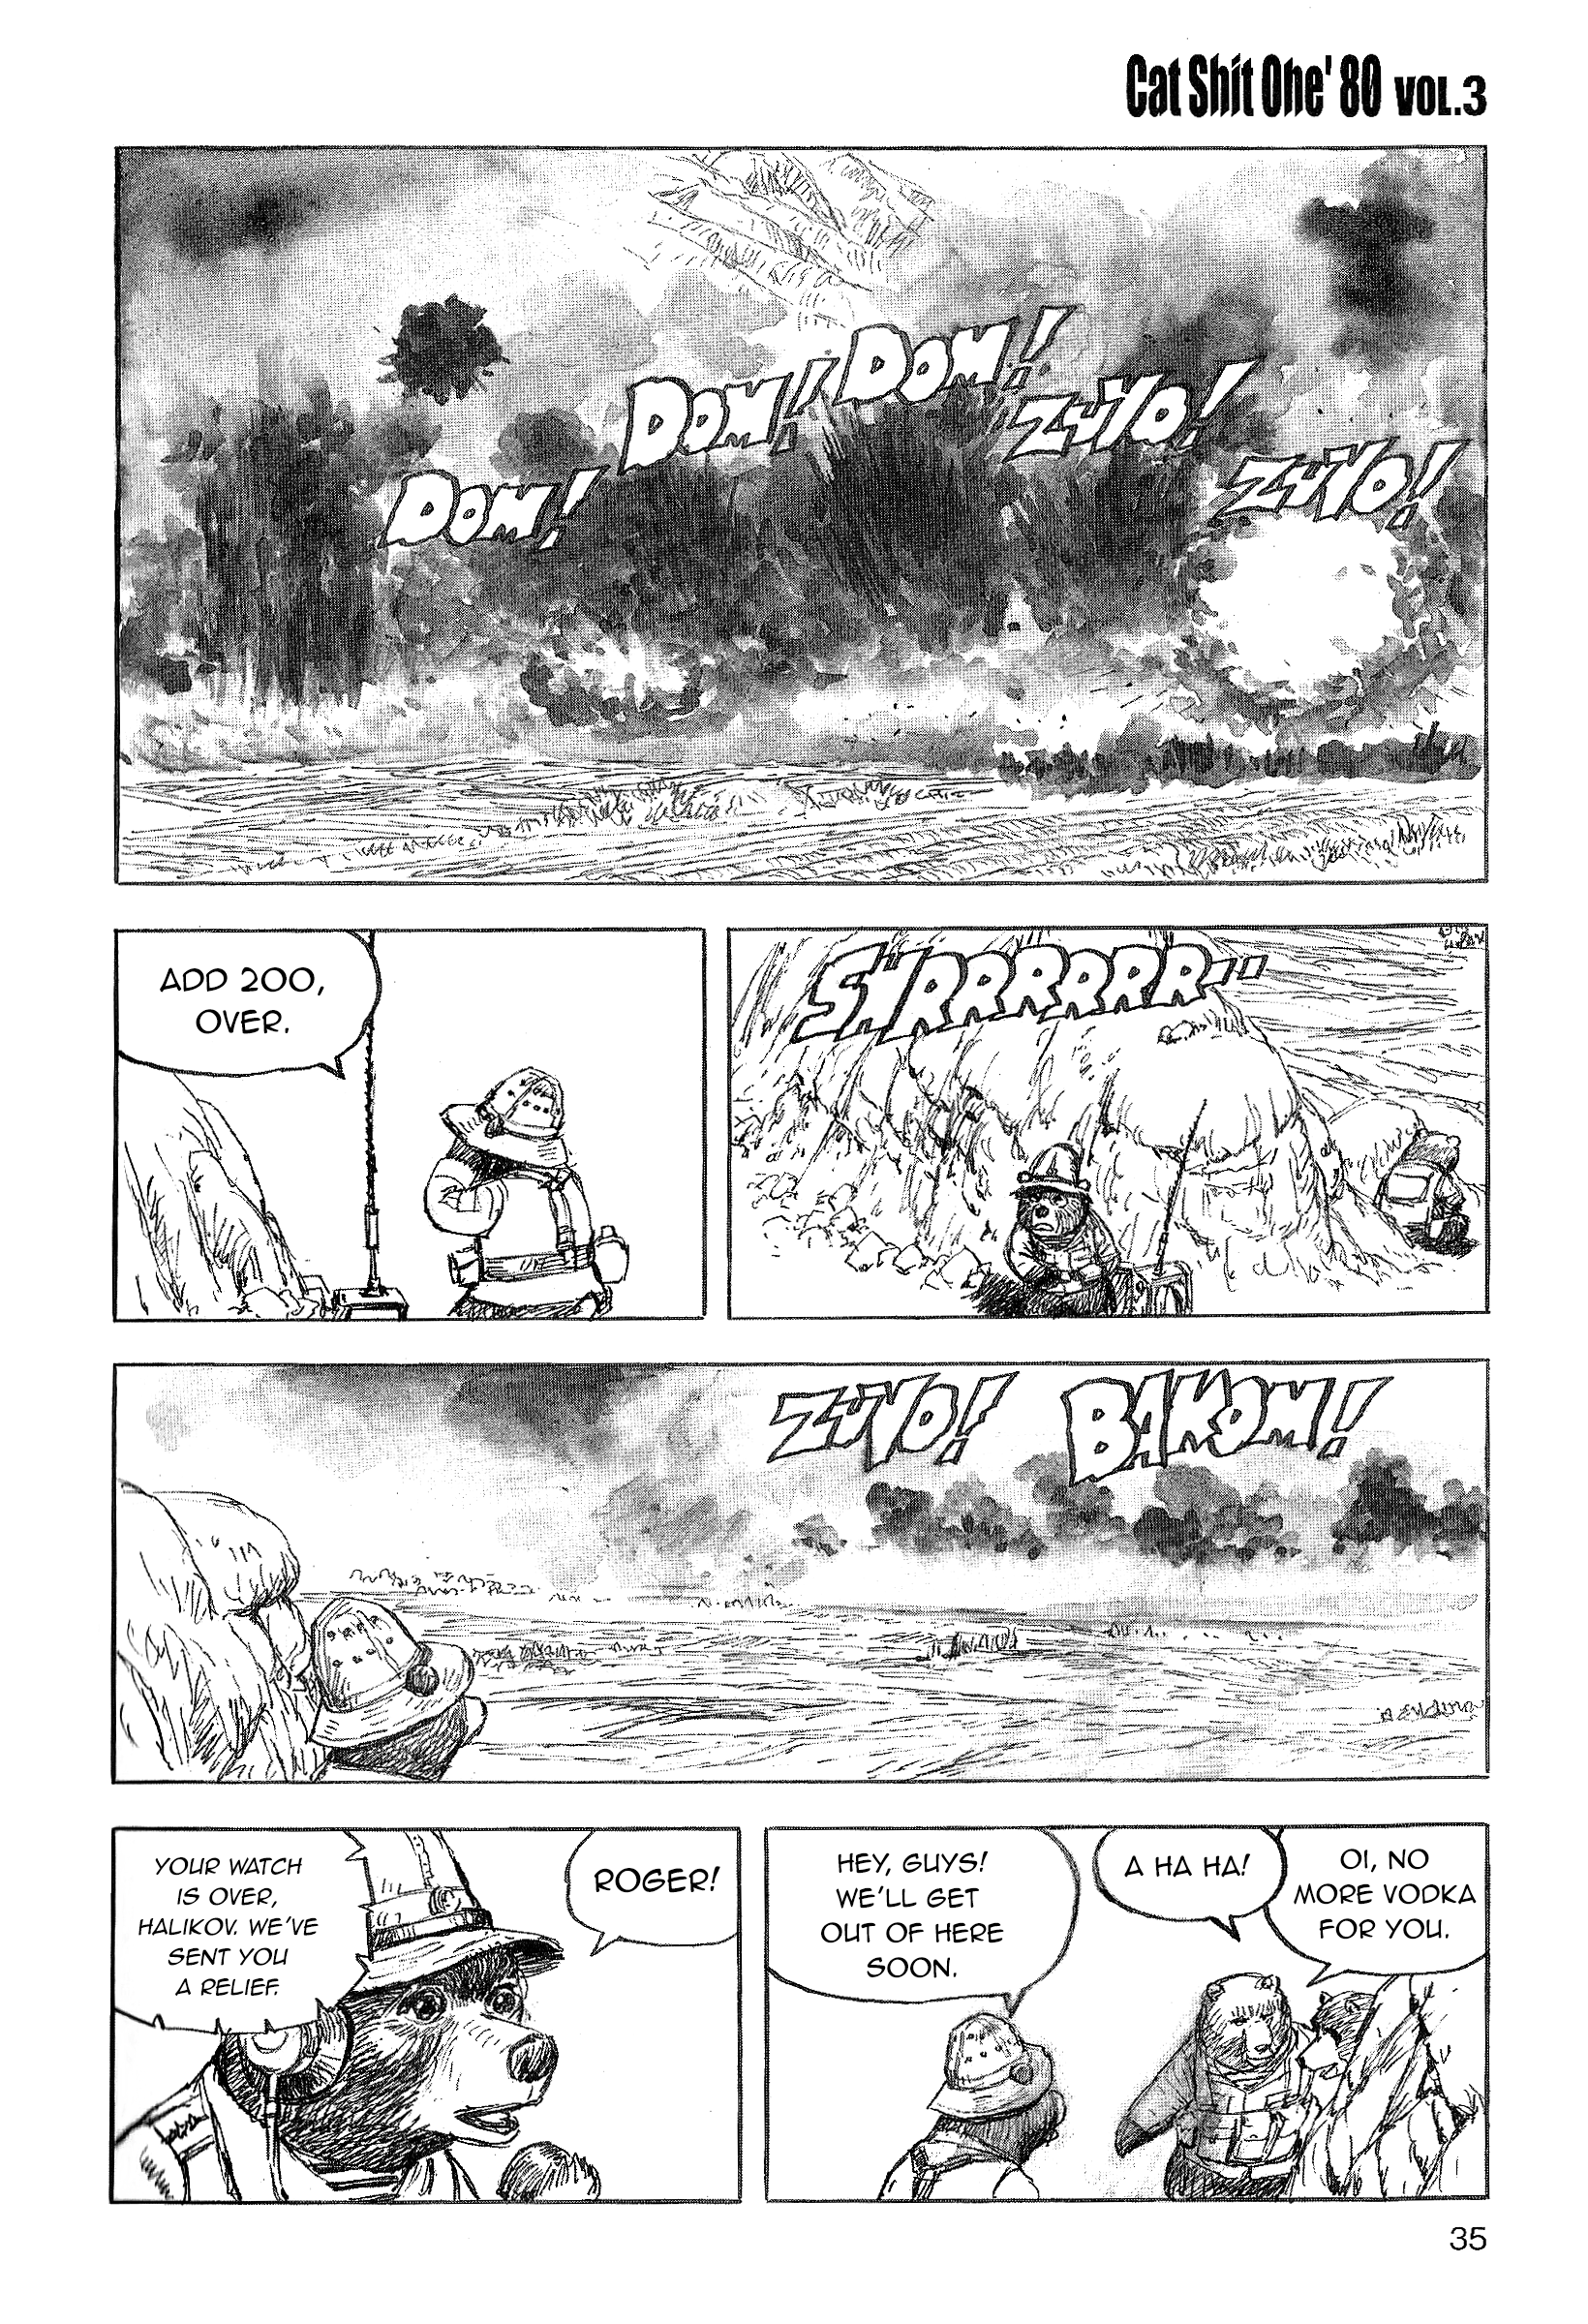 Cat Shit One '80 - Page 1